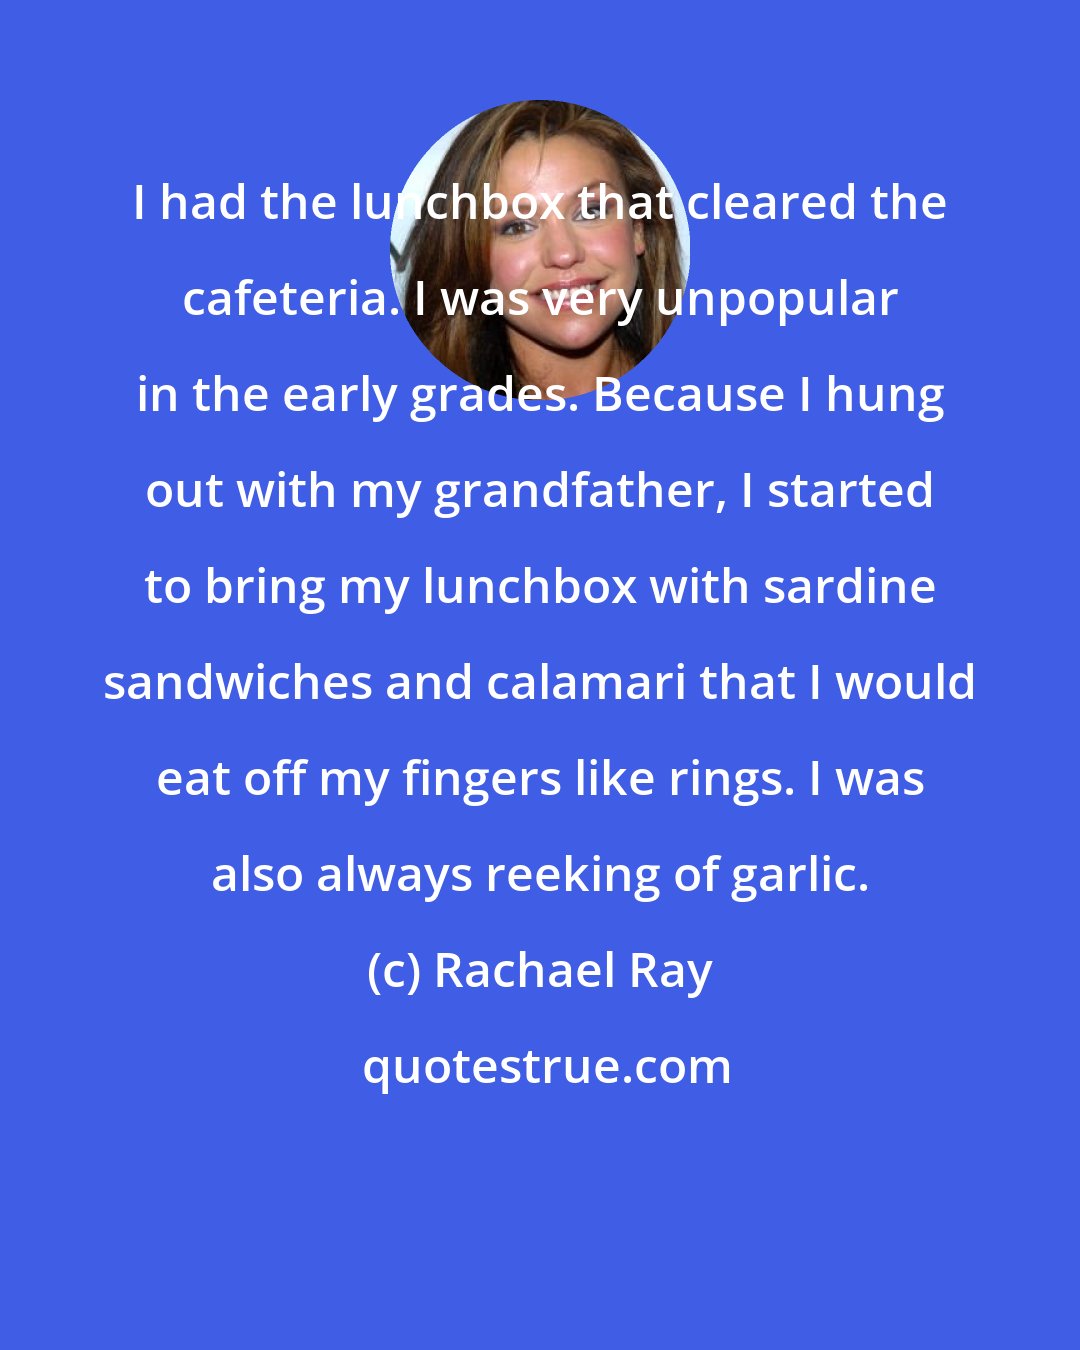 Rachael Ray: I had the lunchbox that cleared the cafeteria. I was very unpopular in the early grades. Because I hung out with my grandfather, I started to bring my lunchbox with sardine sandwiches and calamari that I would eat off my fingers like rings. I was also always reeking of garlic.